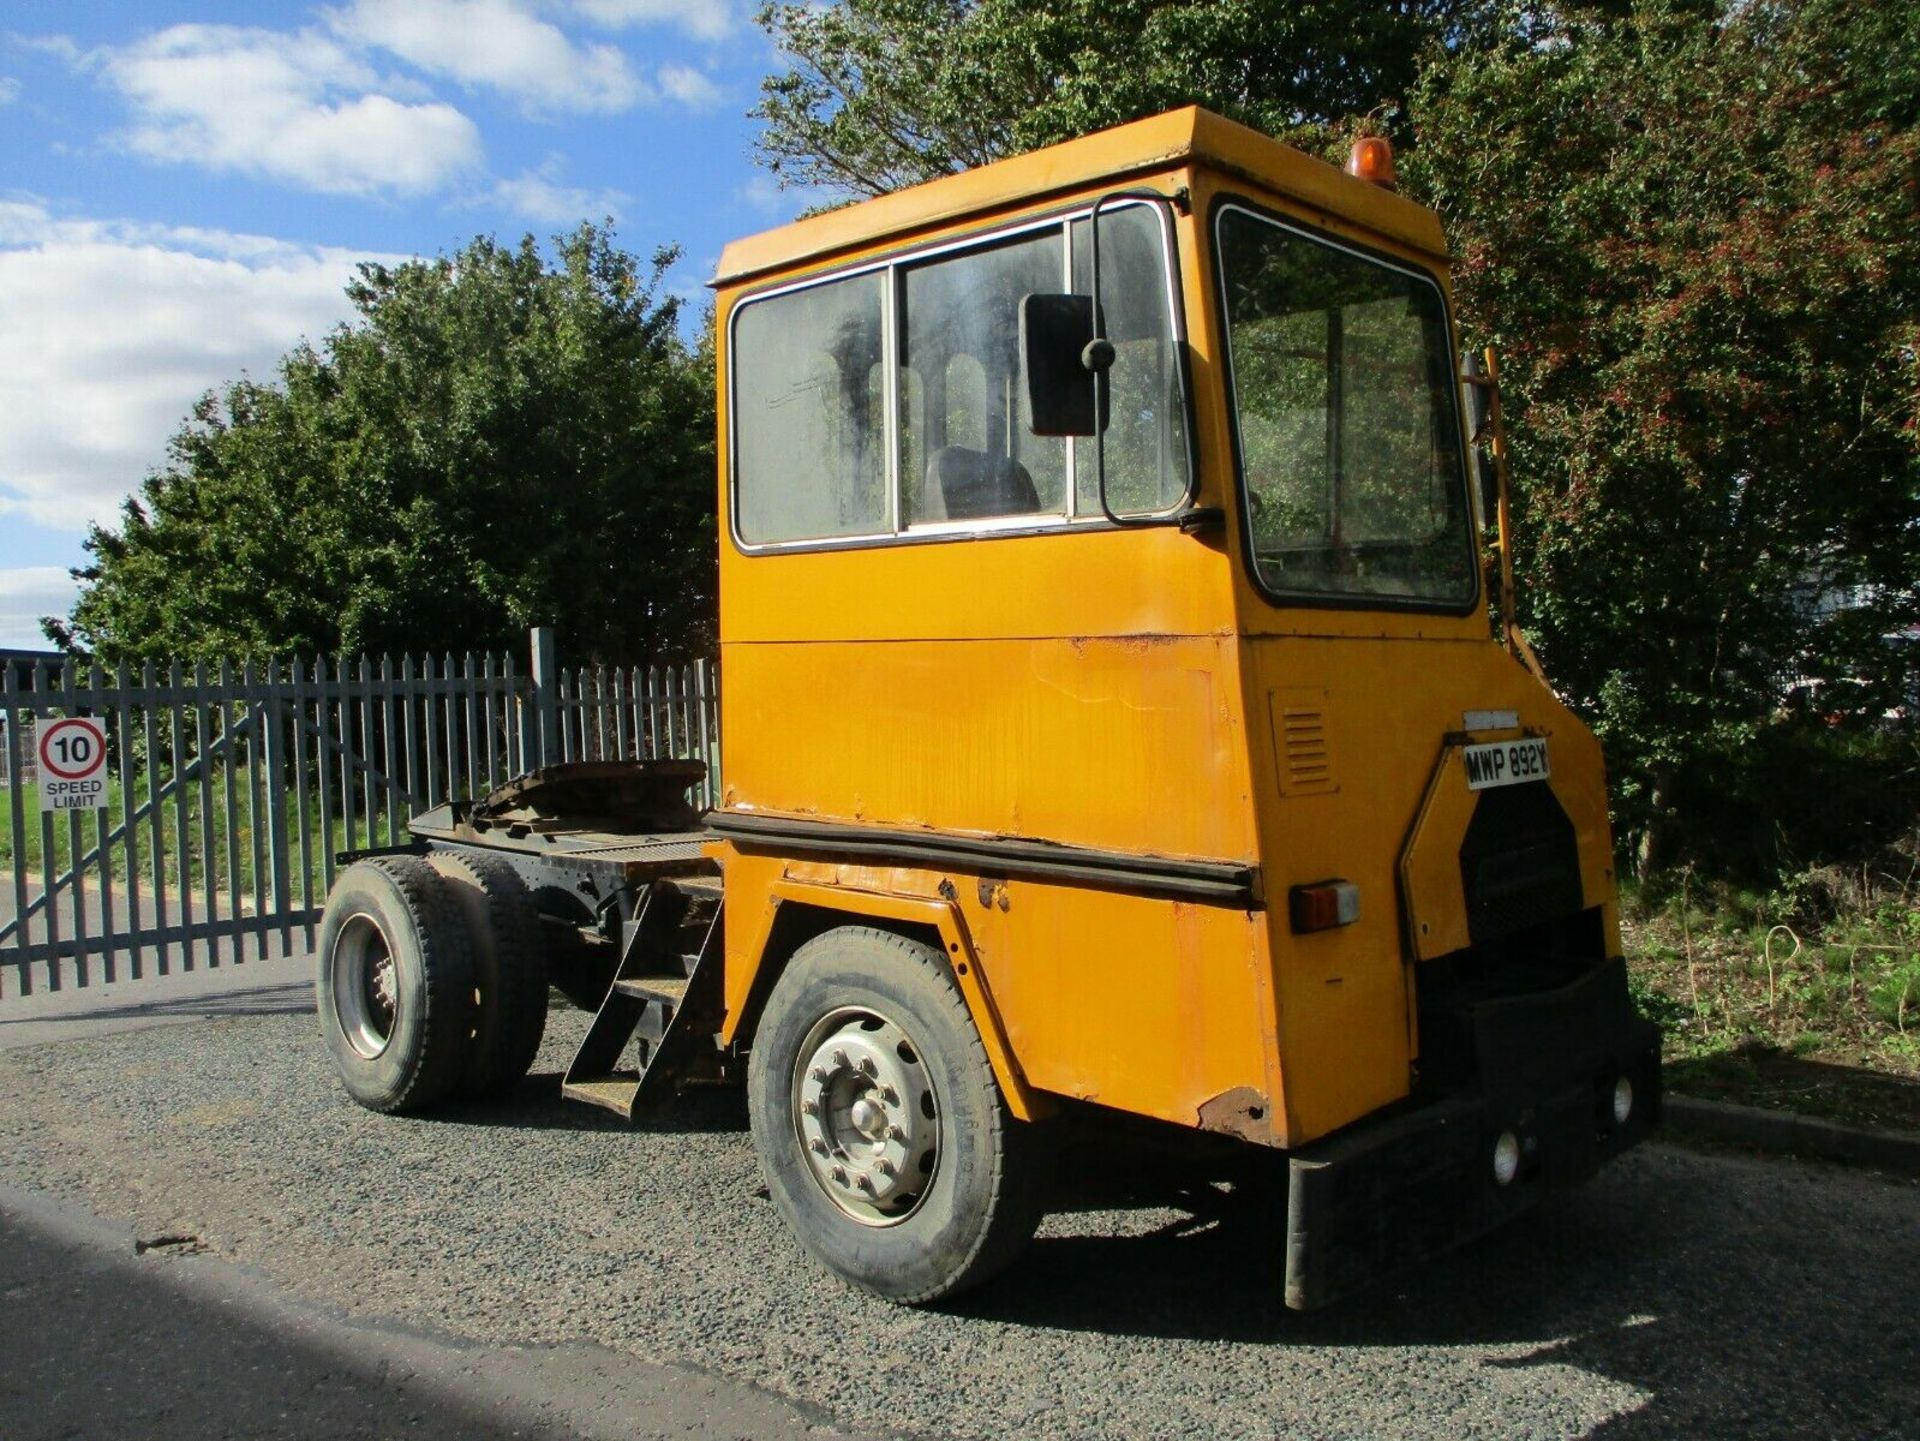 Reliance Dock spotter shunter tow tug tractor unit